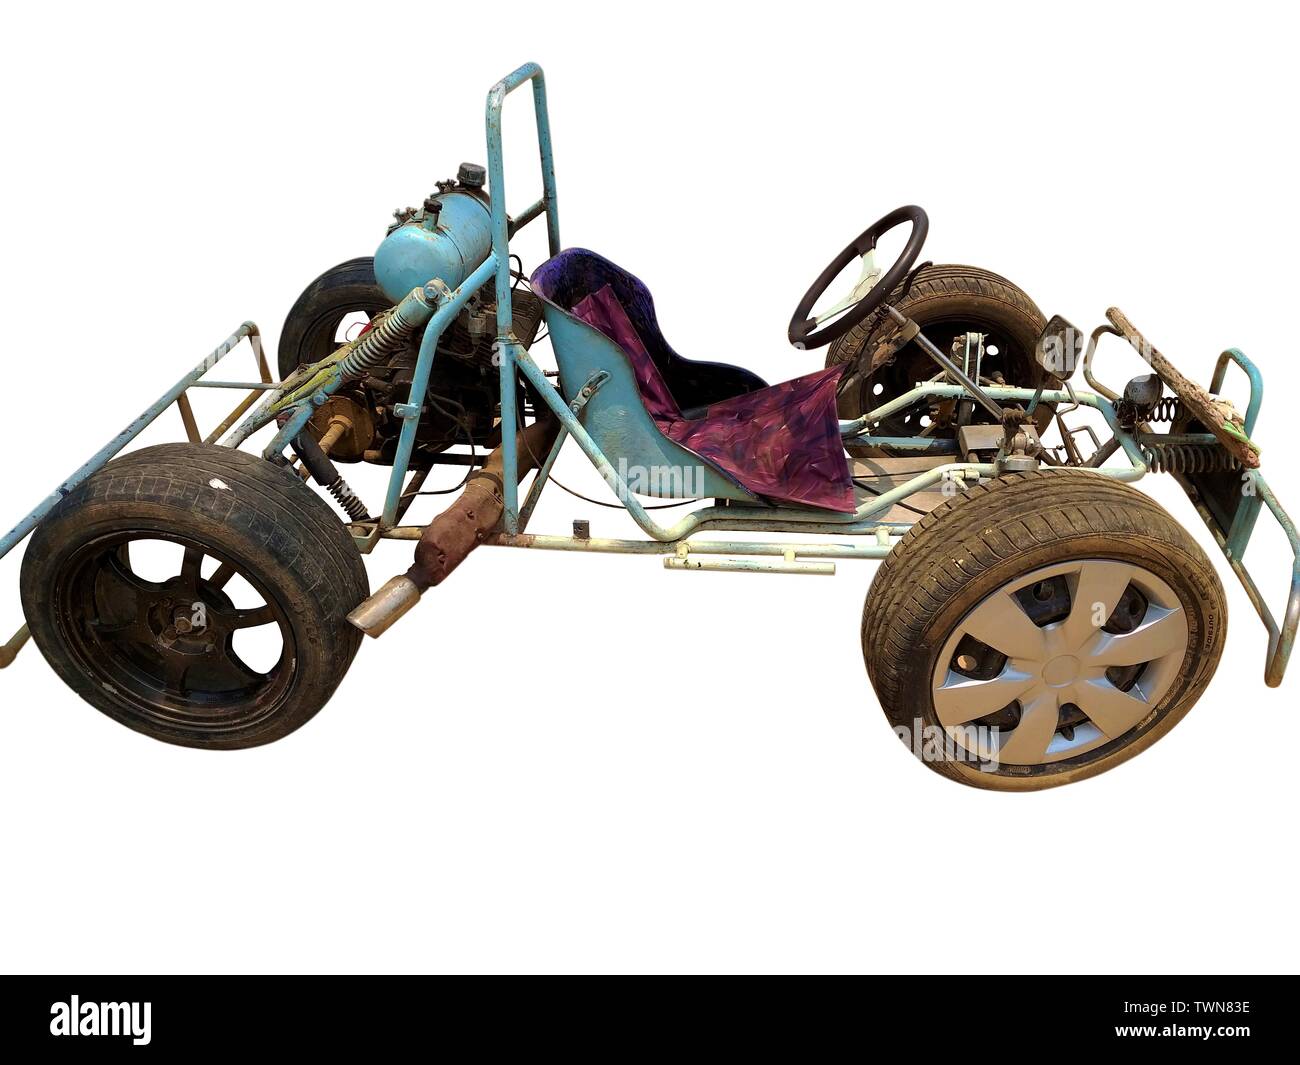 Go-kart cars by incorporating old parts On a white background Stock Photo